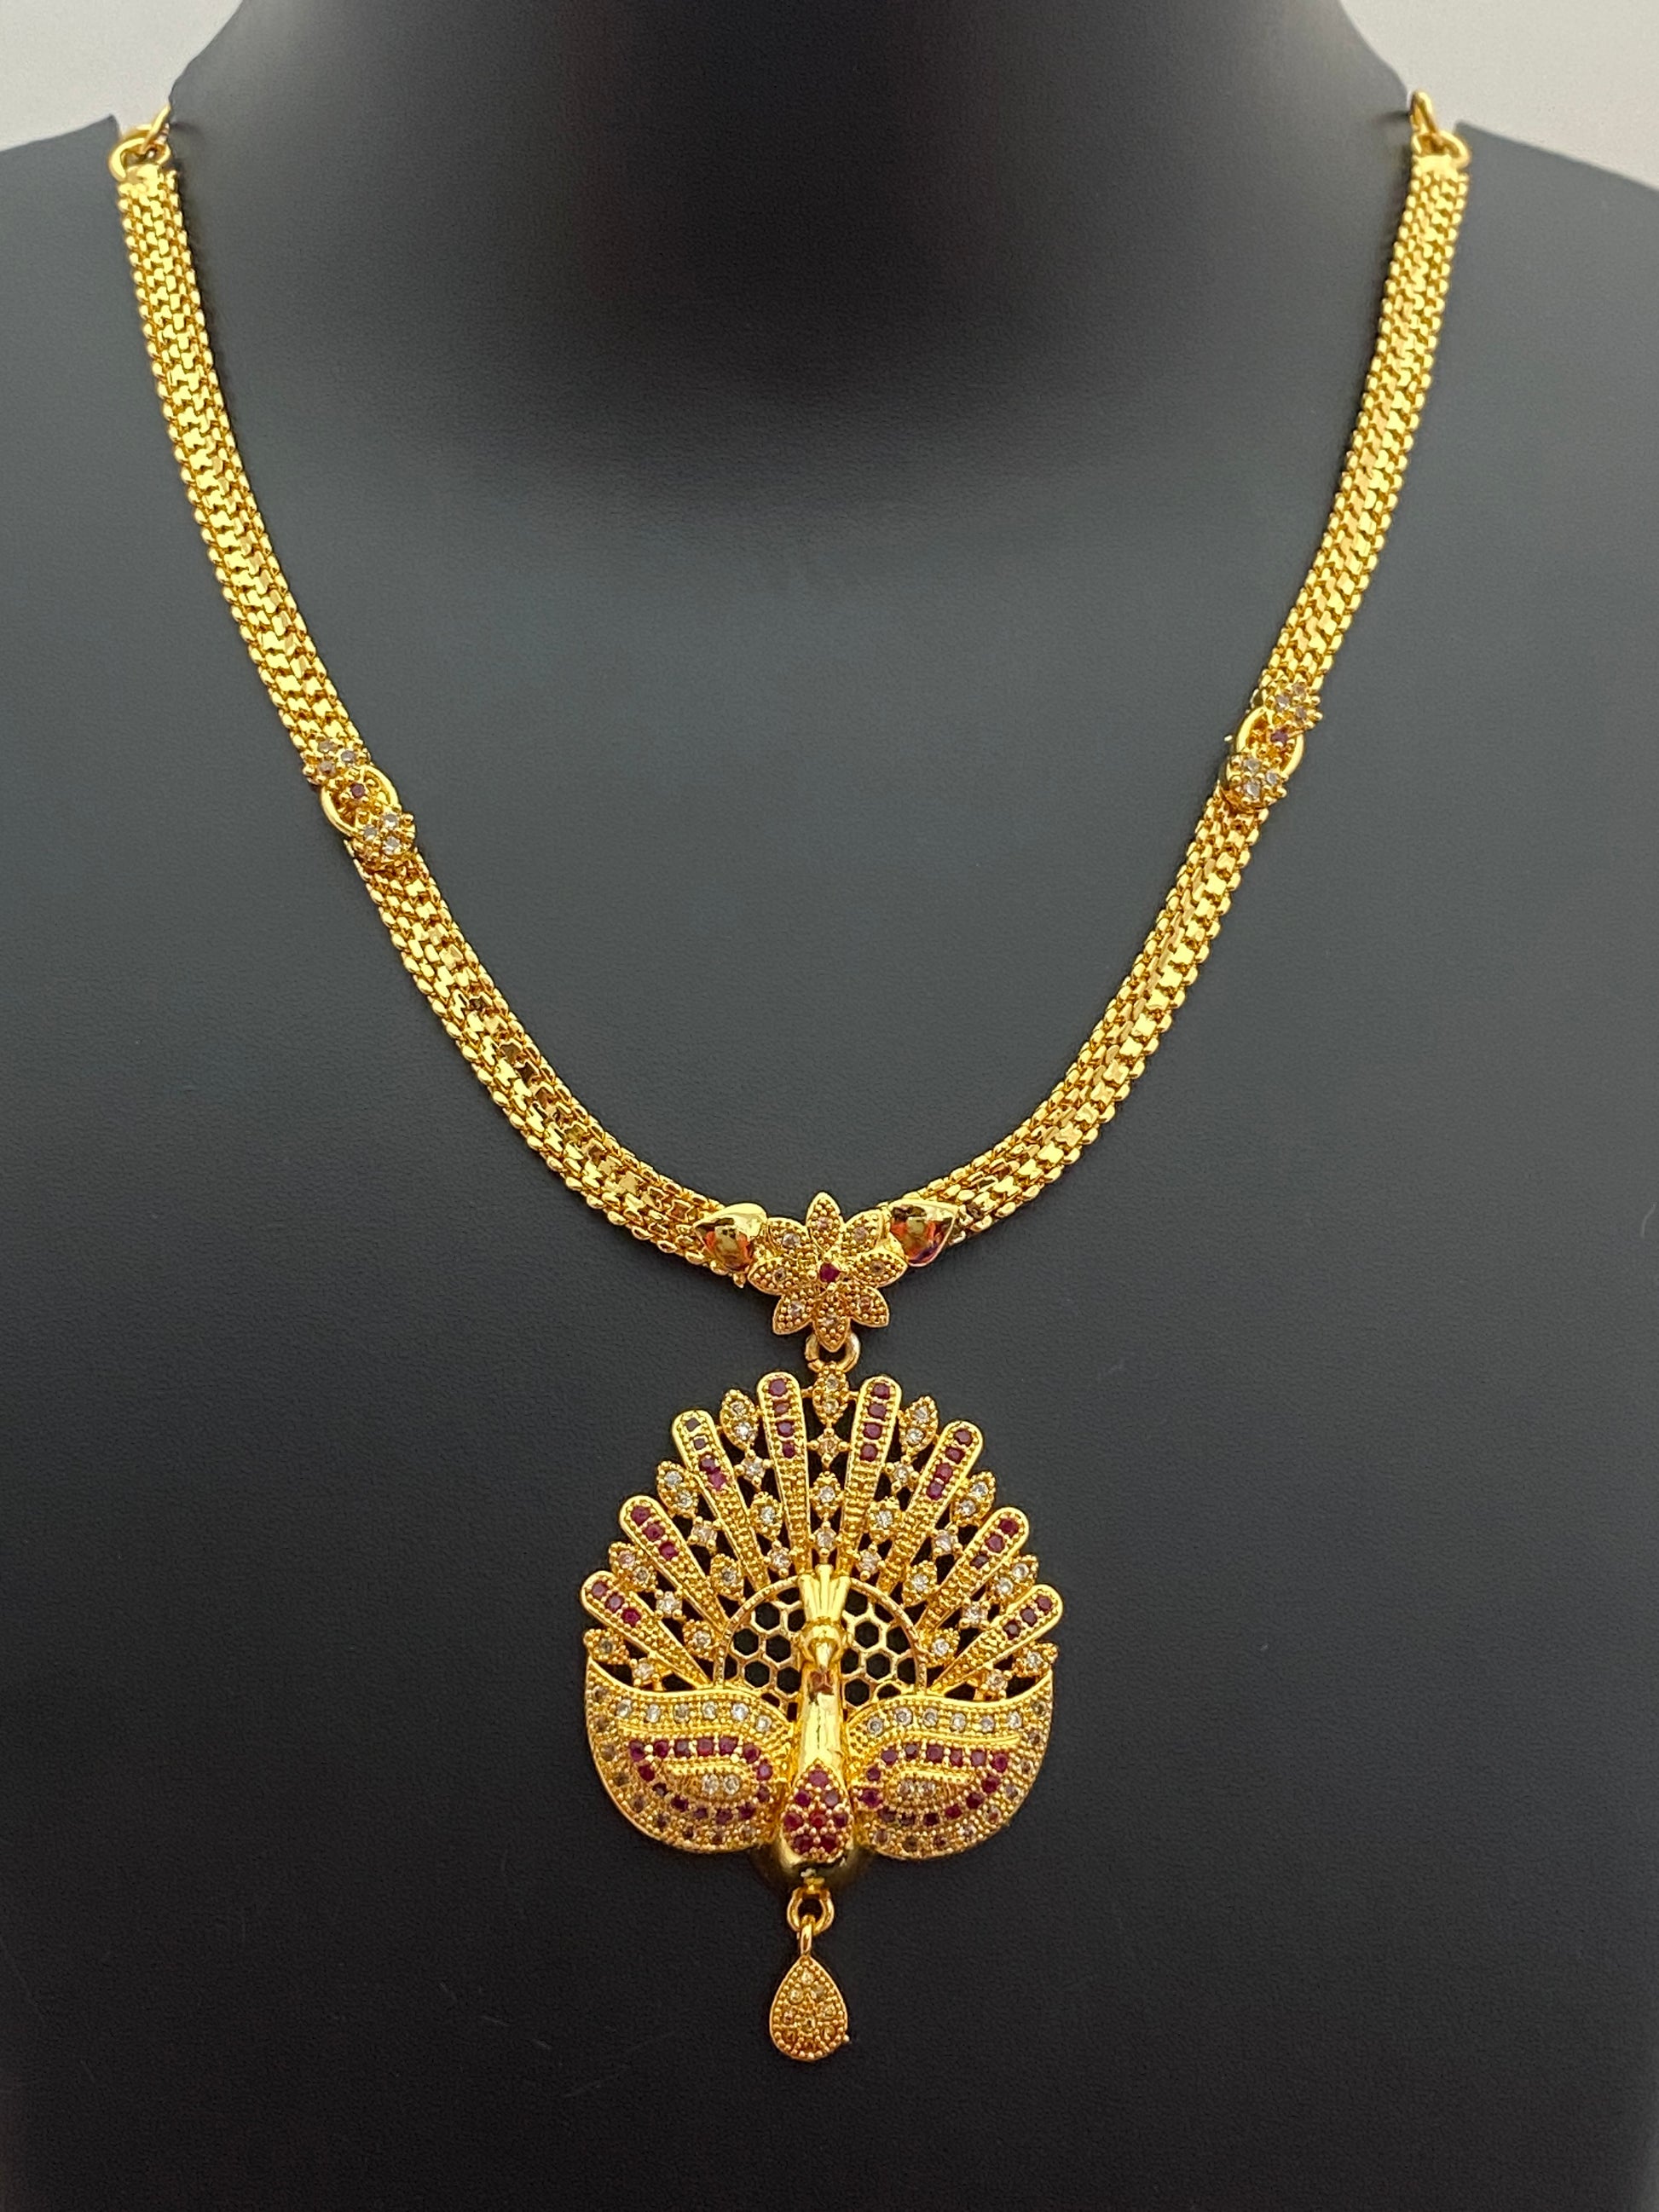 Delightful Floral Designer Gold Plated Necklace With Peacock Pendant